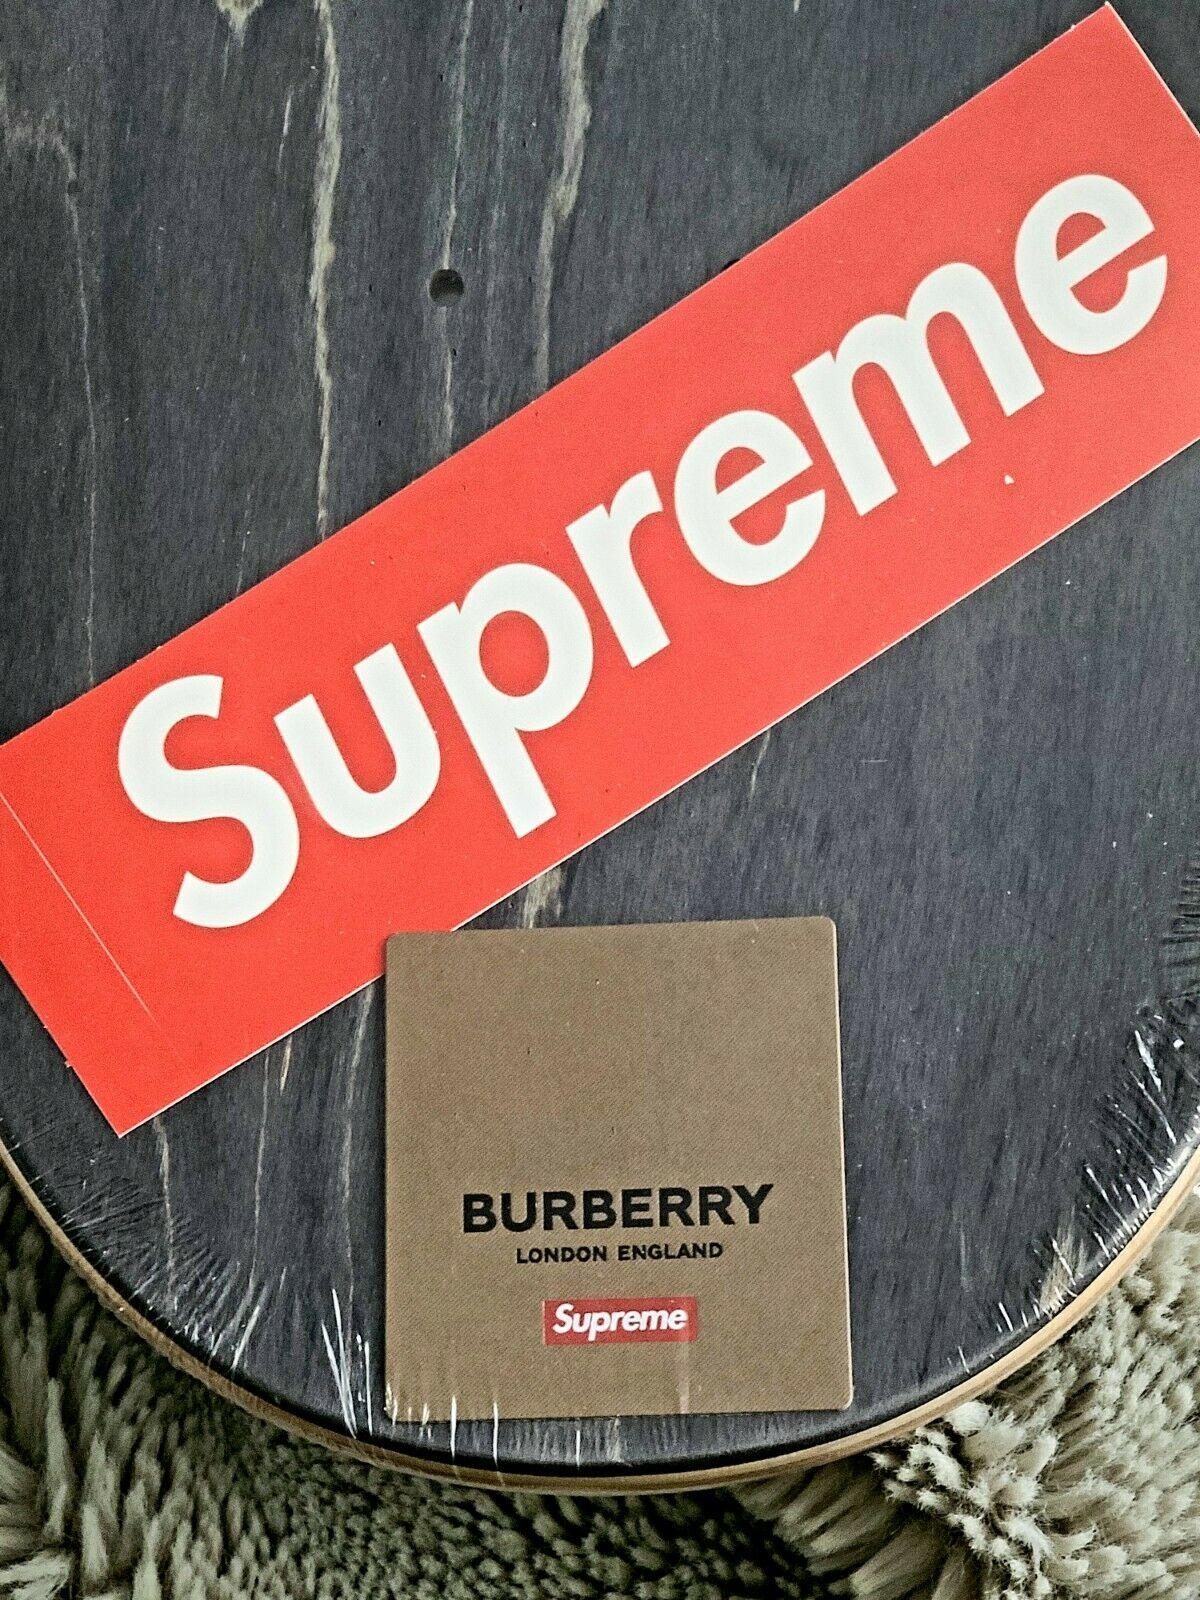 Supreme Collaboration with Burberry Pink Patterned Skateboard Deck